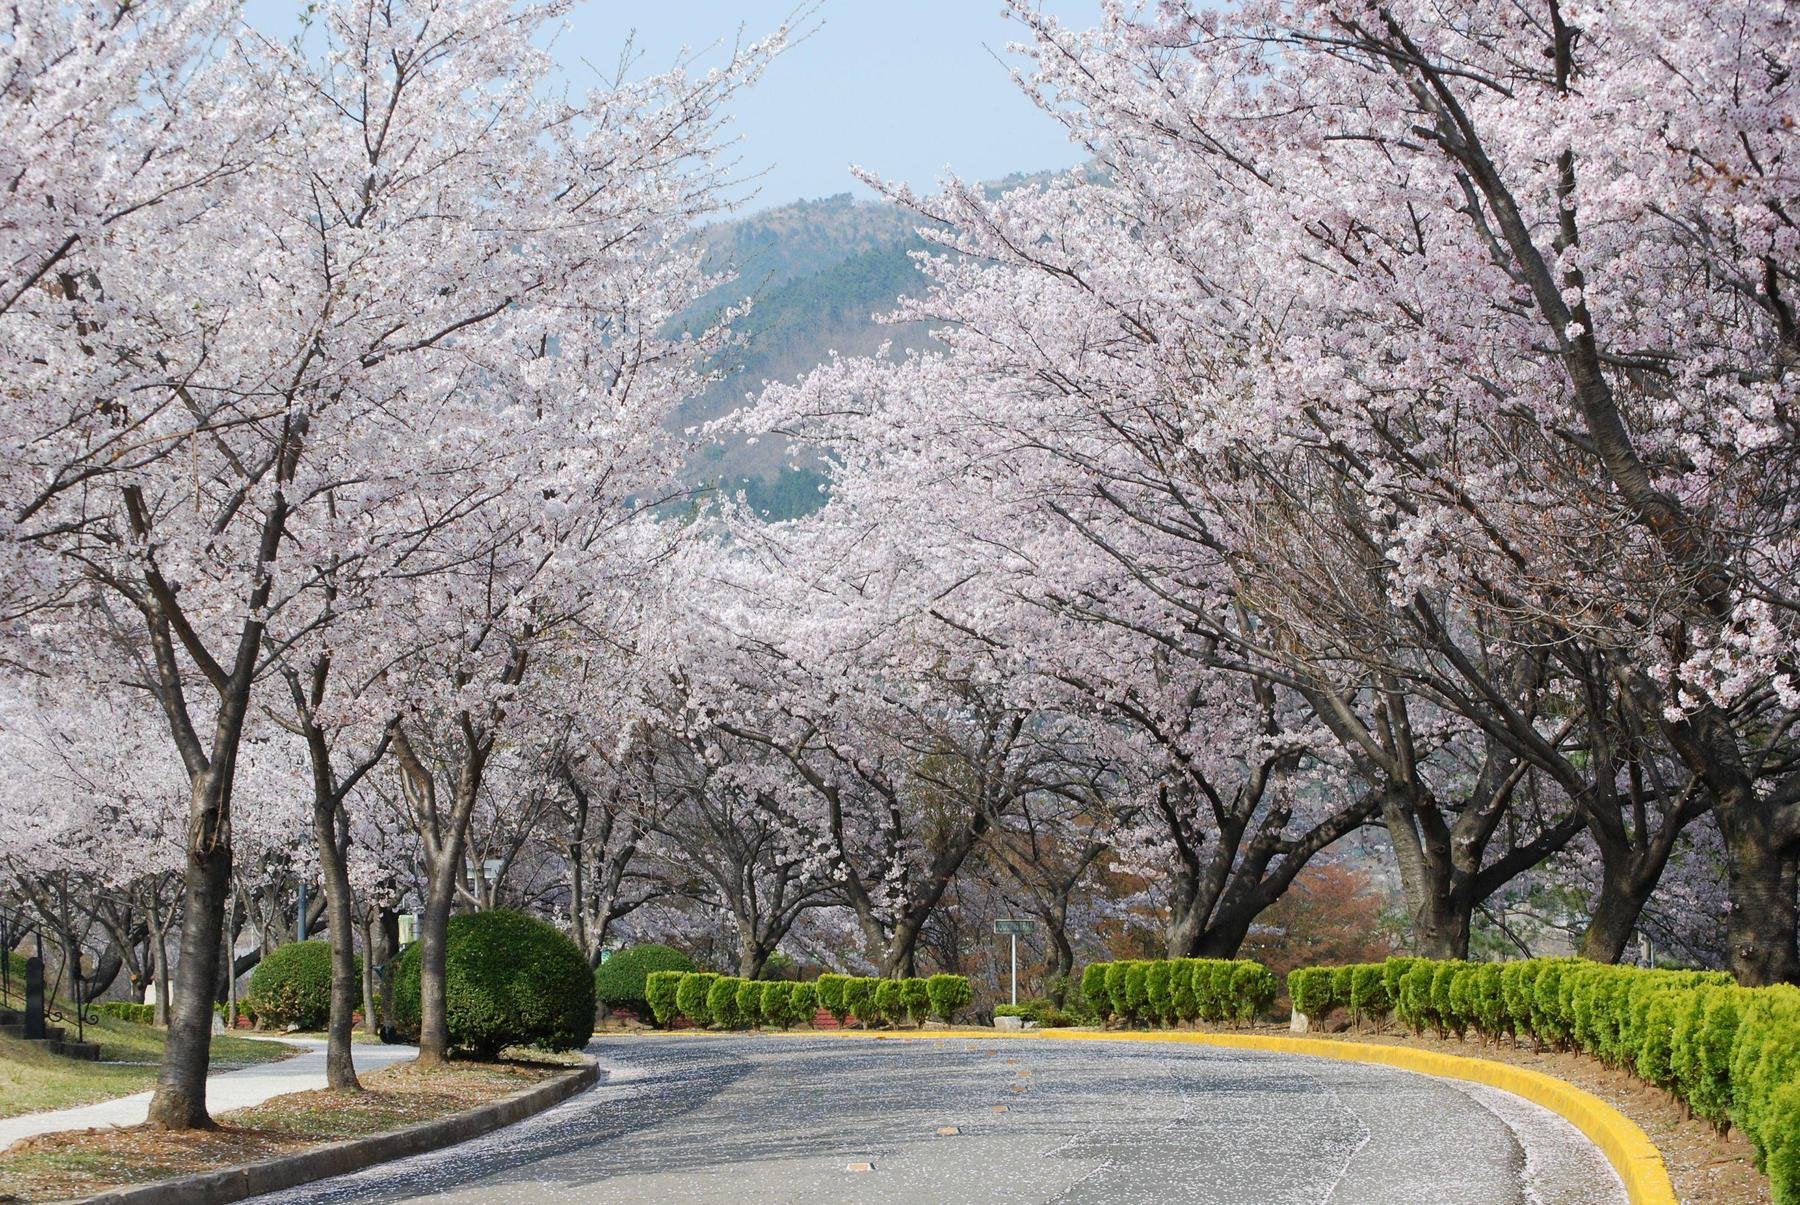 Continuing with photo of Korea.Blooming Cherry Blossoms, South Korea